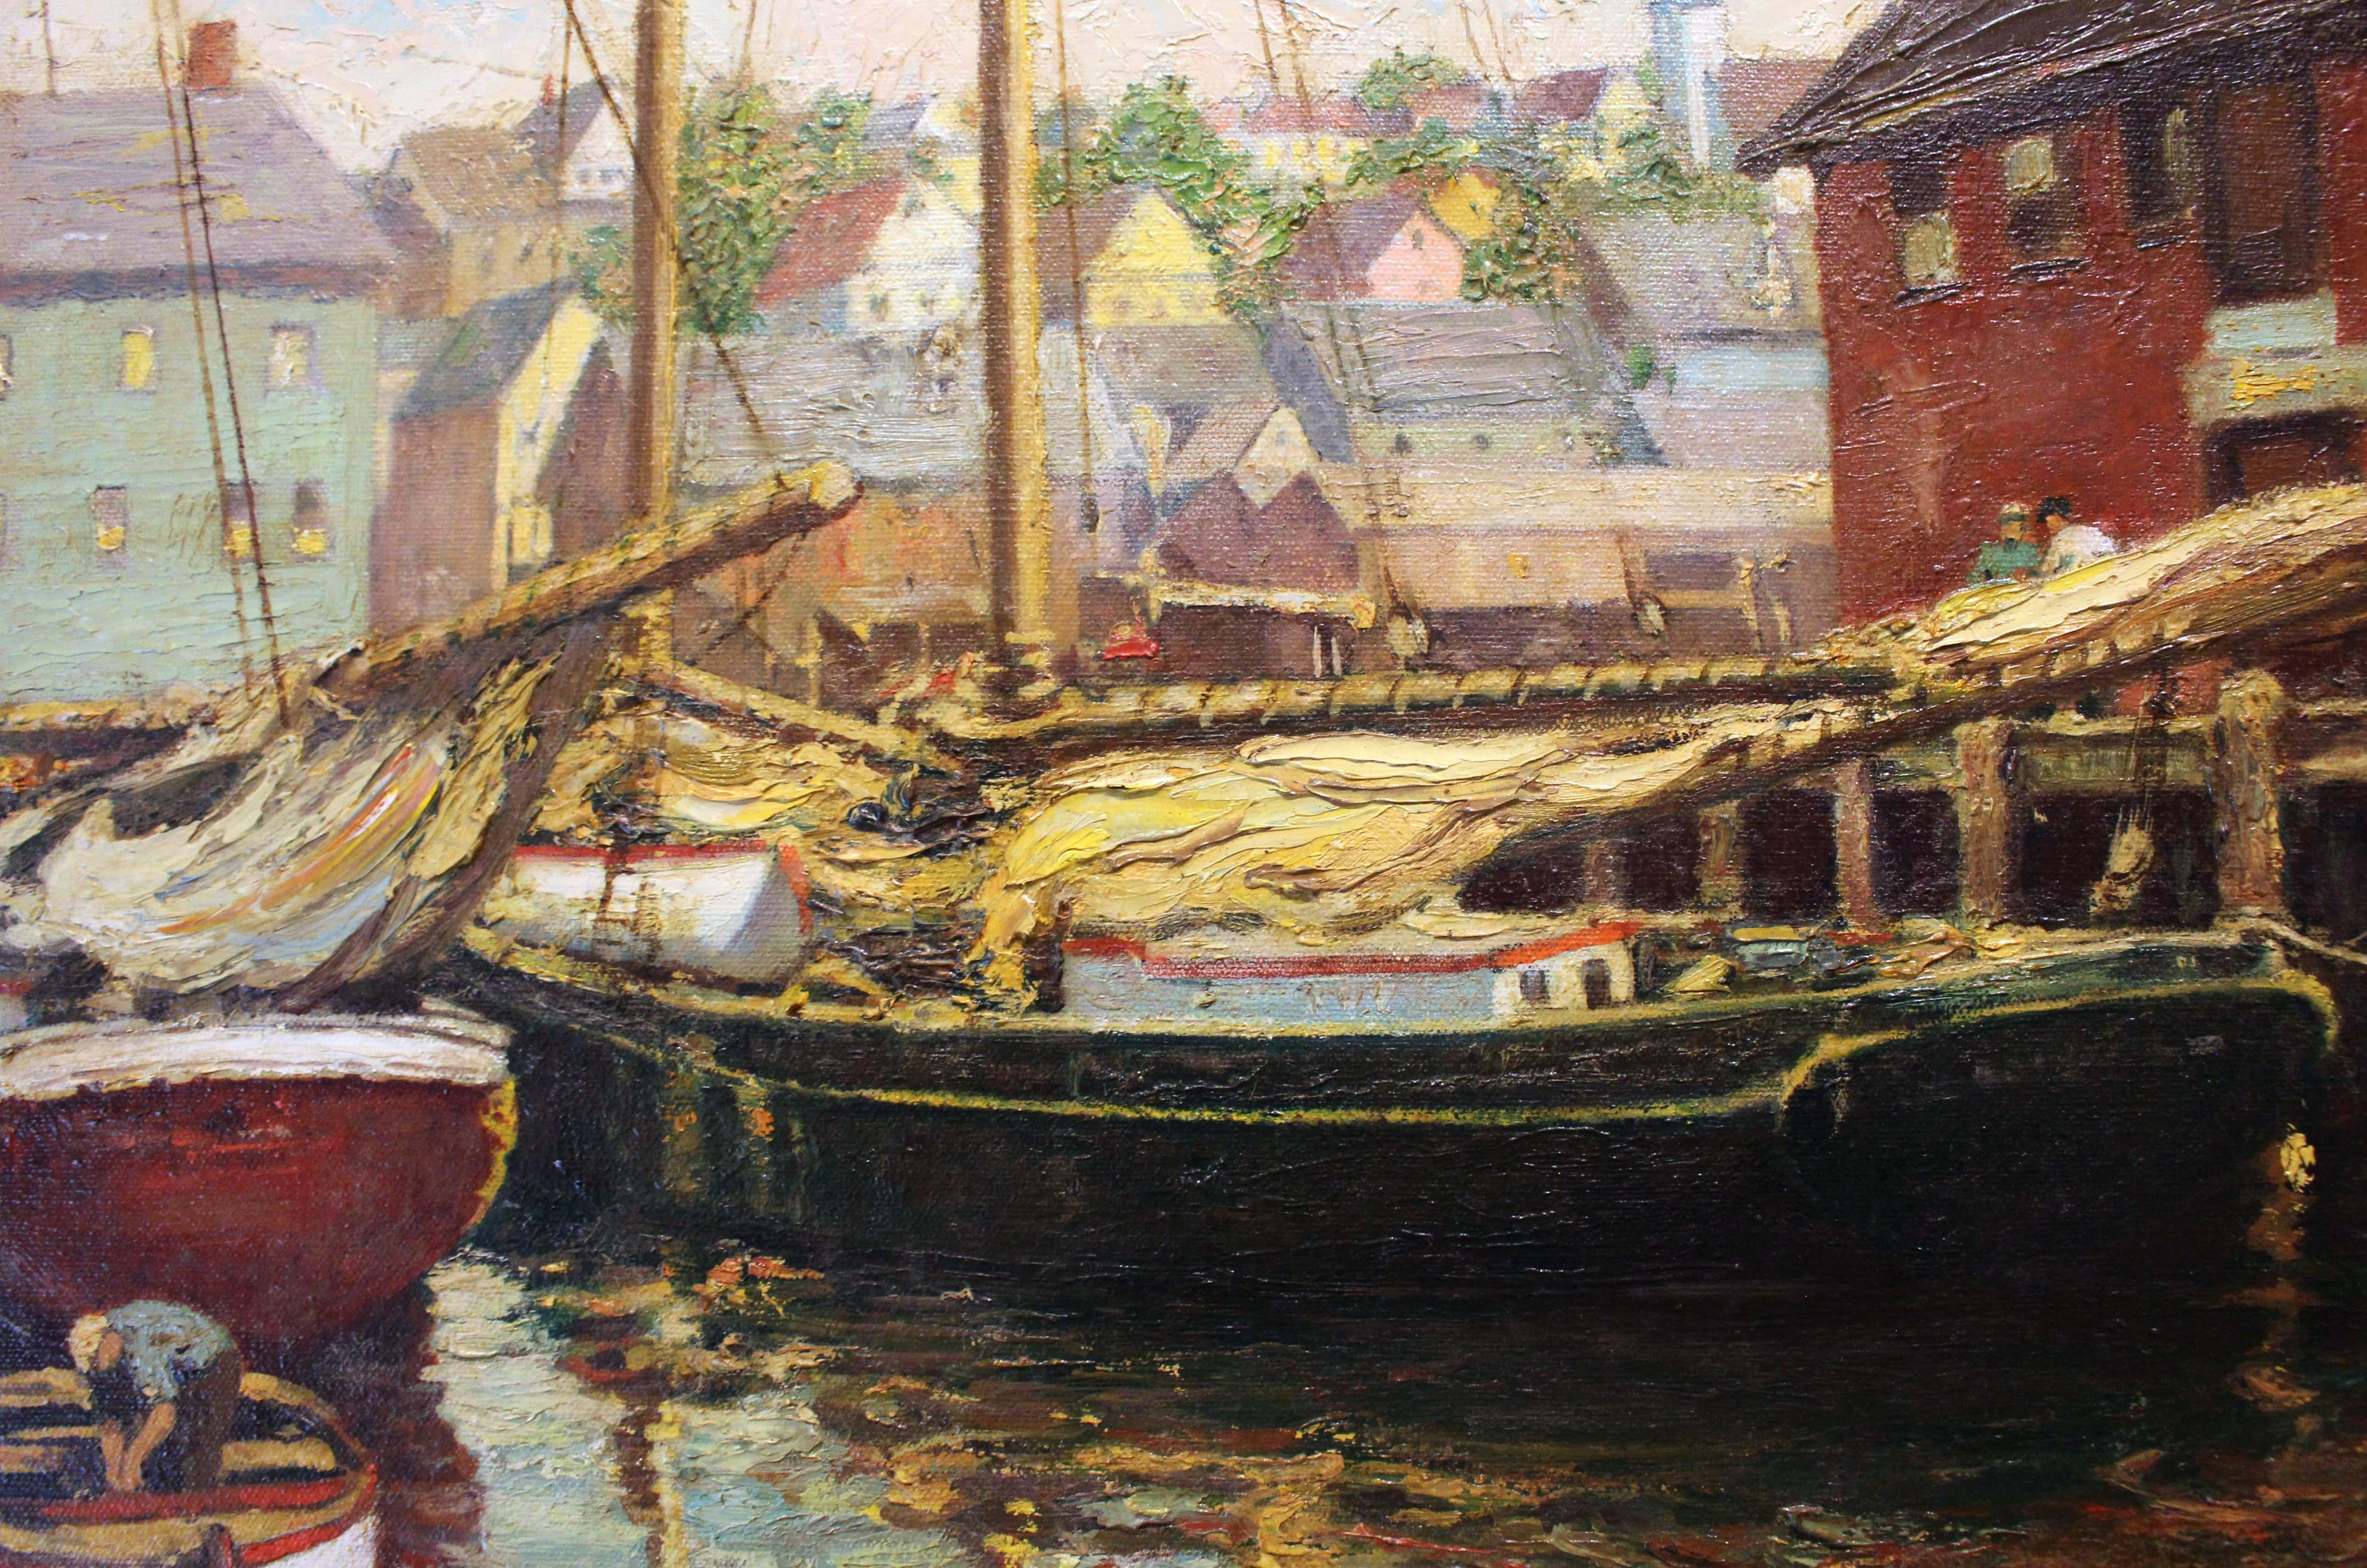 Circa 1910-30 oil on canvas of a harbor scene by Frederick Judd Waugh, American, 1861-1940. Signed lower right. Strong, bold impressionistic brush strokes - the hallmark of Waugh's style. Studied Pennsylvania Academy of Fine Arts and Academie Julian